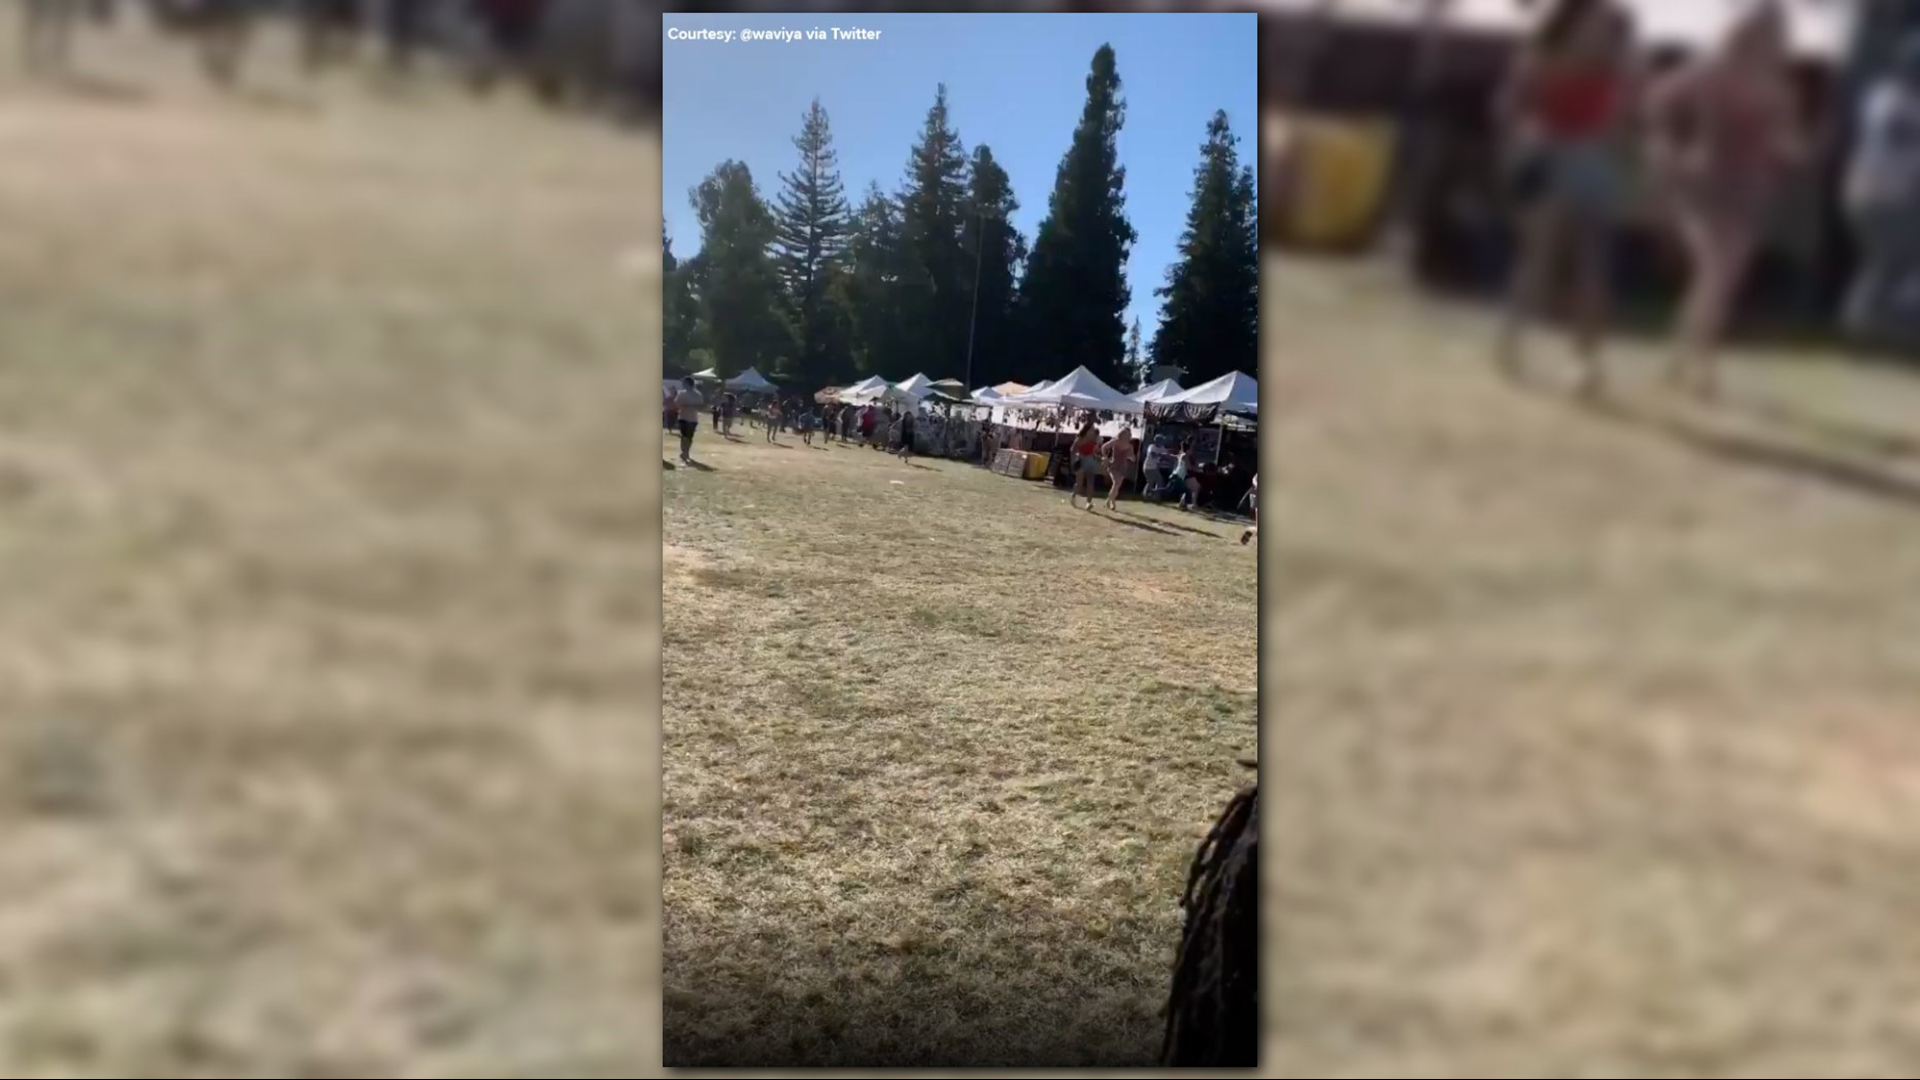 Several festival attendees recorded the aftermath on videos posted to social media. Gunfire could be heard in a video recorded by @wayvia on Twitter.